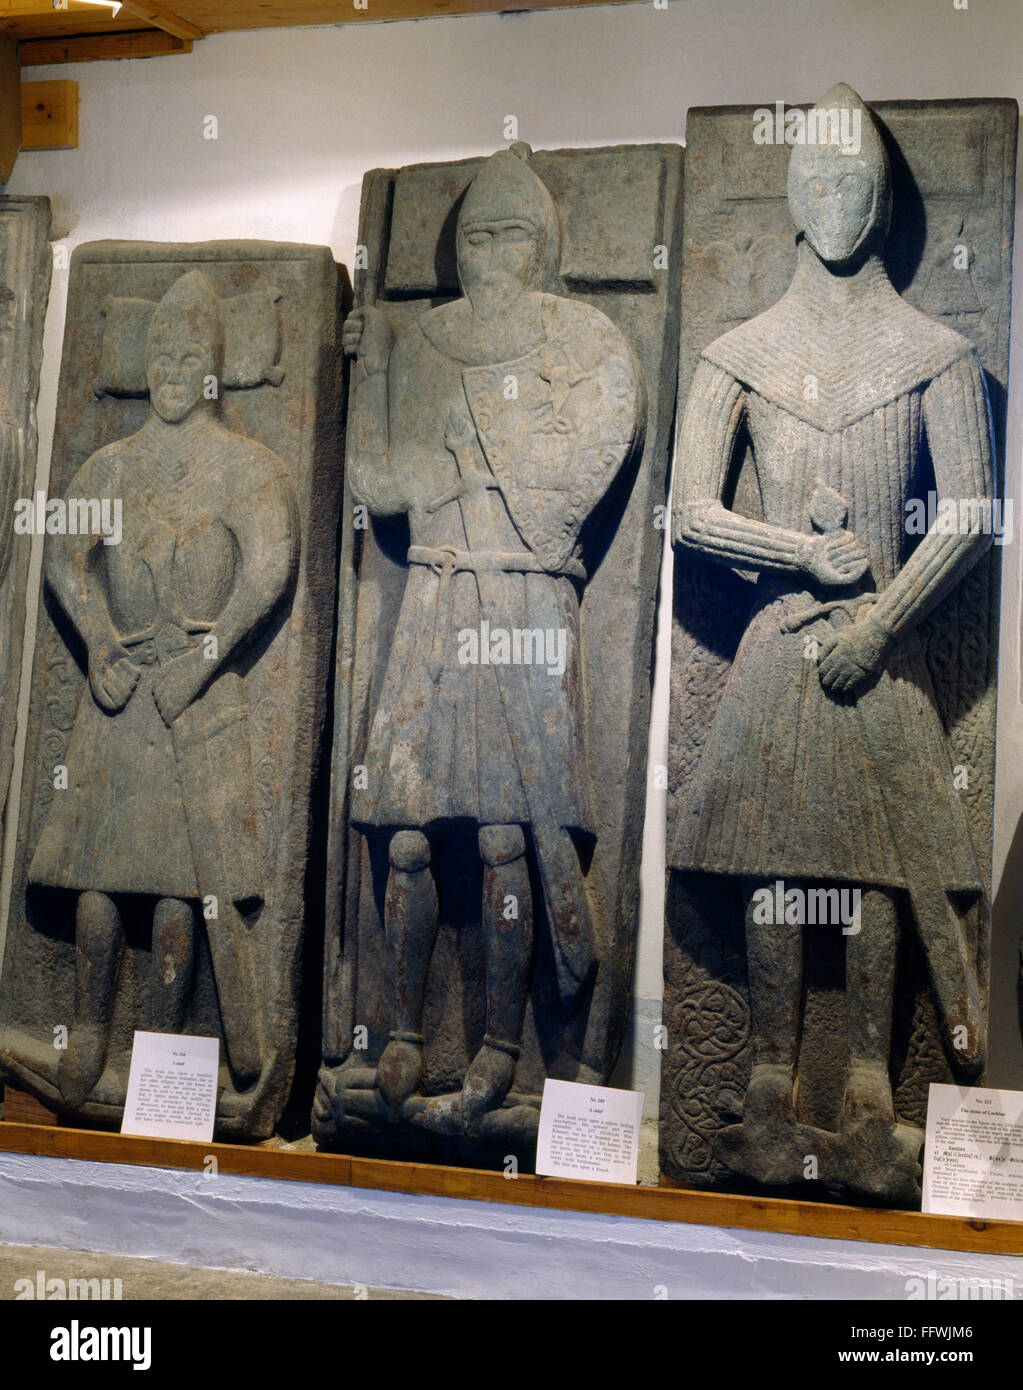 Three West Highland chieftan's grave slabs including the Lachlan Stone. Iona Abbey museum, Inner Hebrides, Scotland, UK Stock Photo